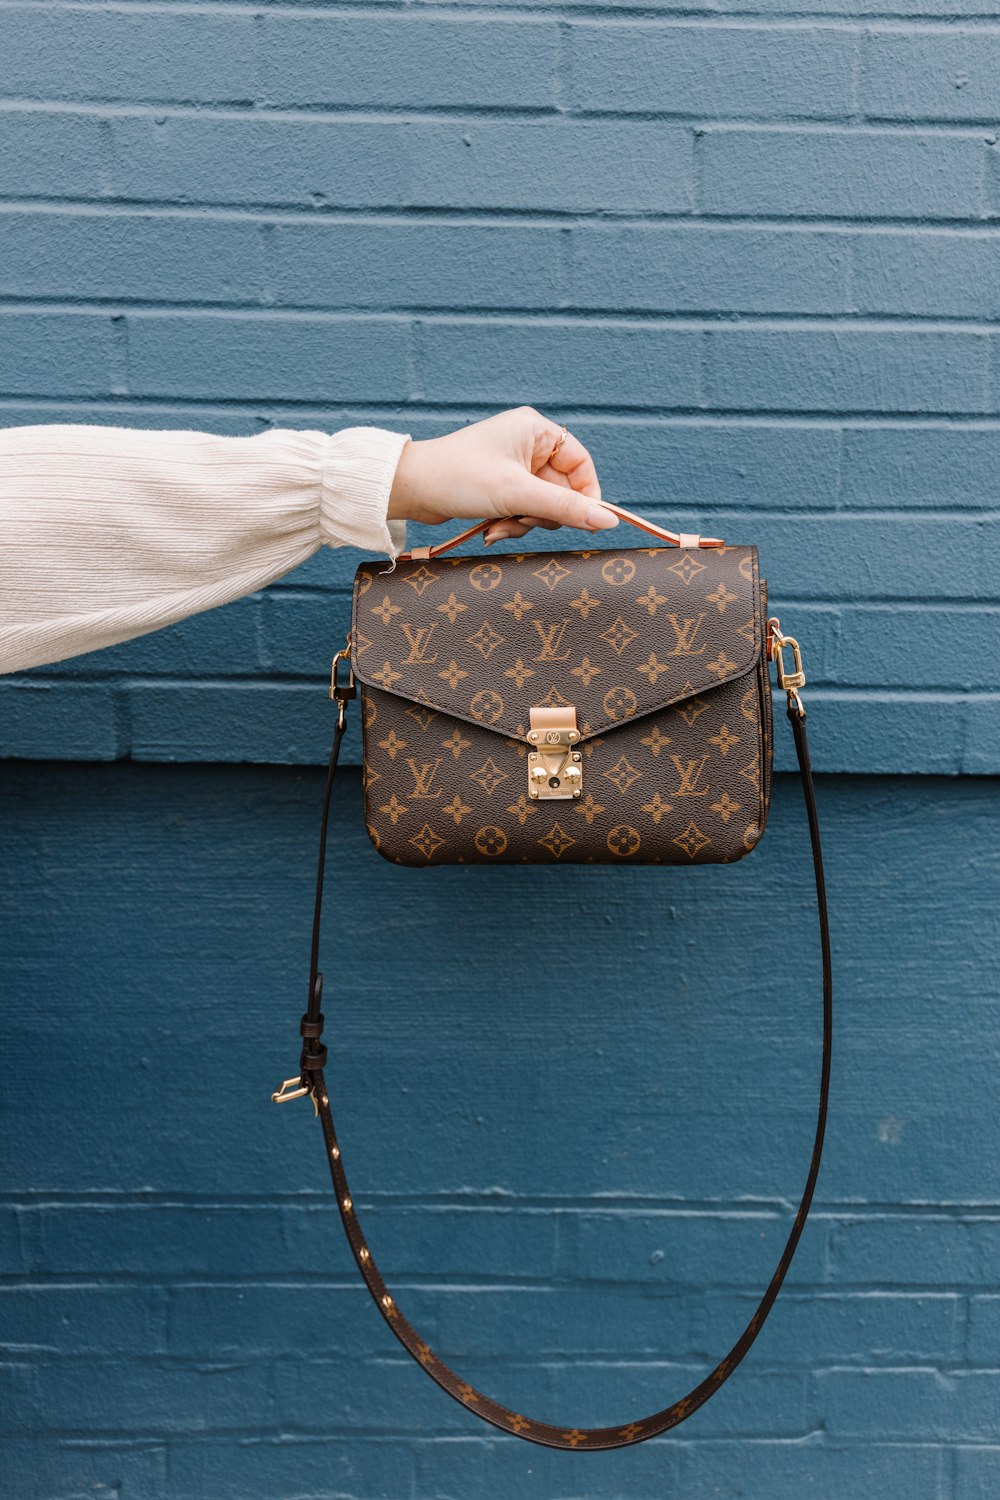 Revolutionize Your Louis Vuitton Bag With These Easy-peasy Tips - 0